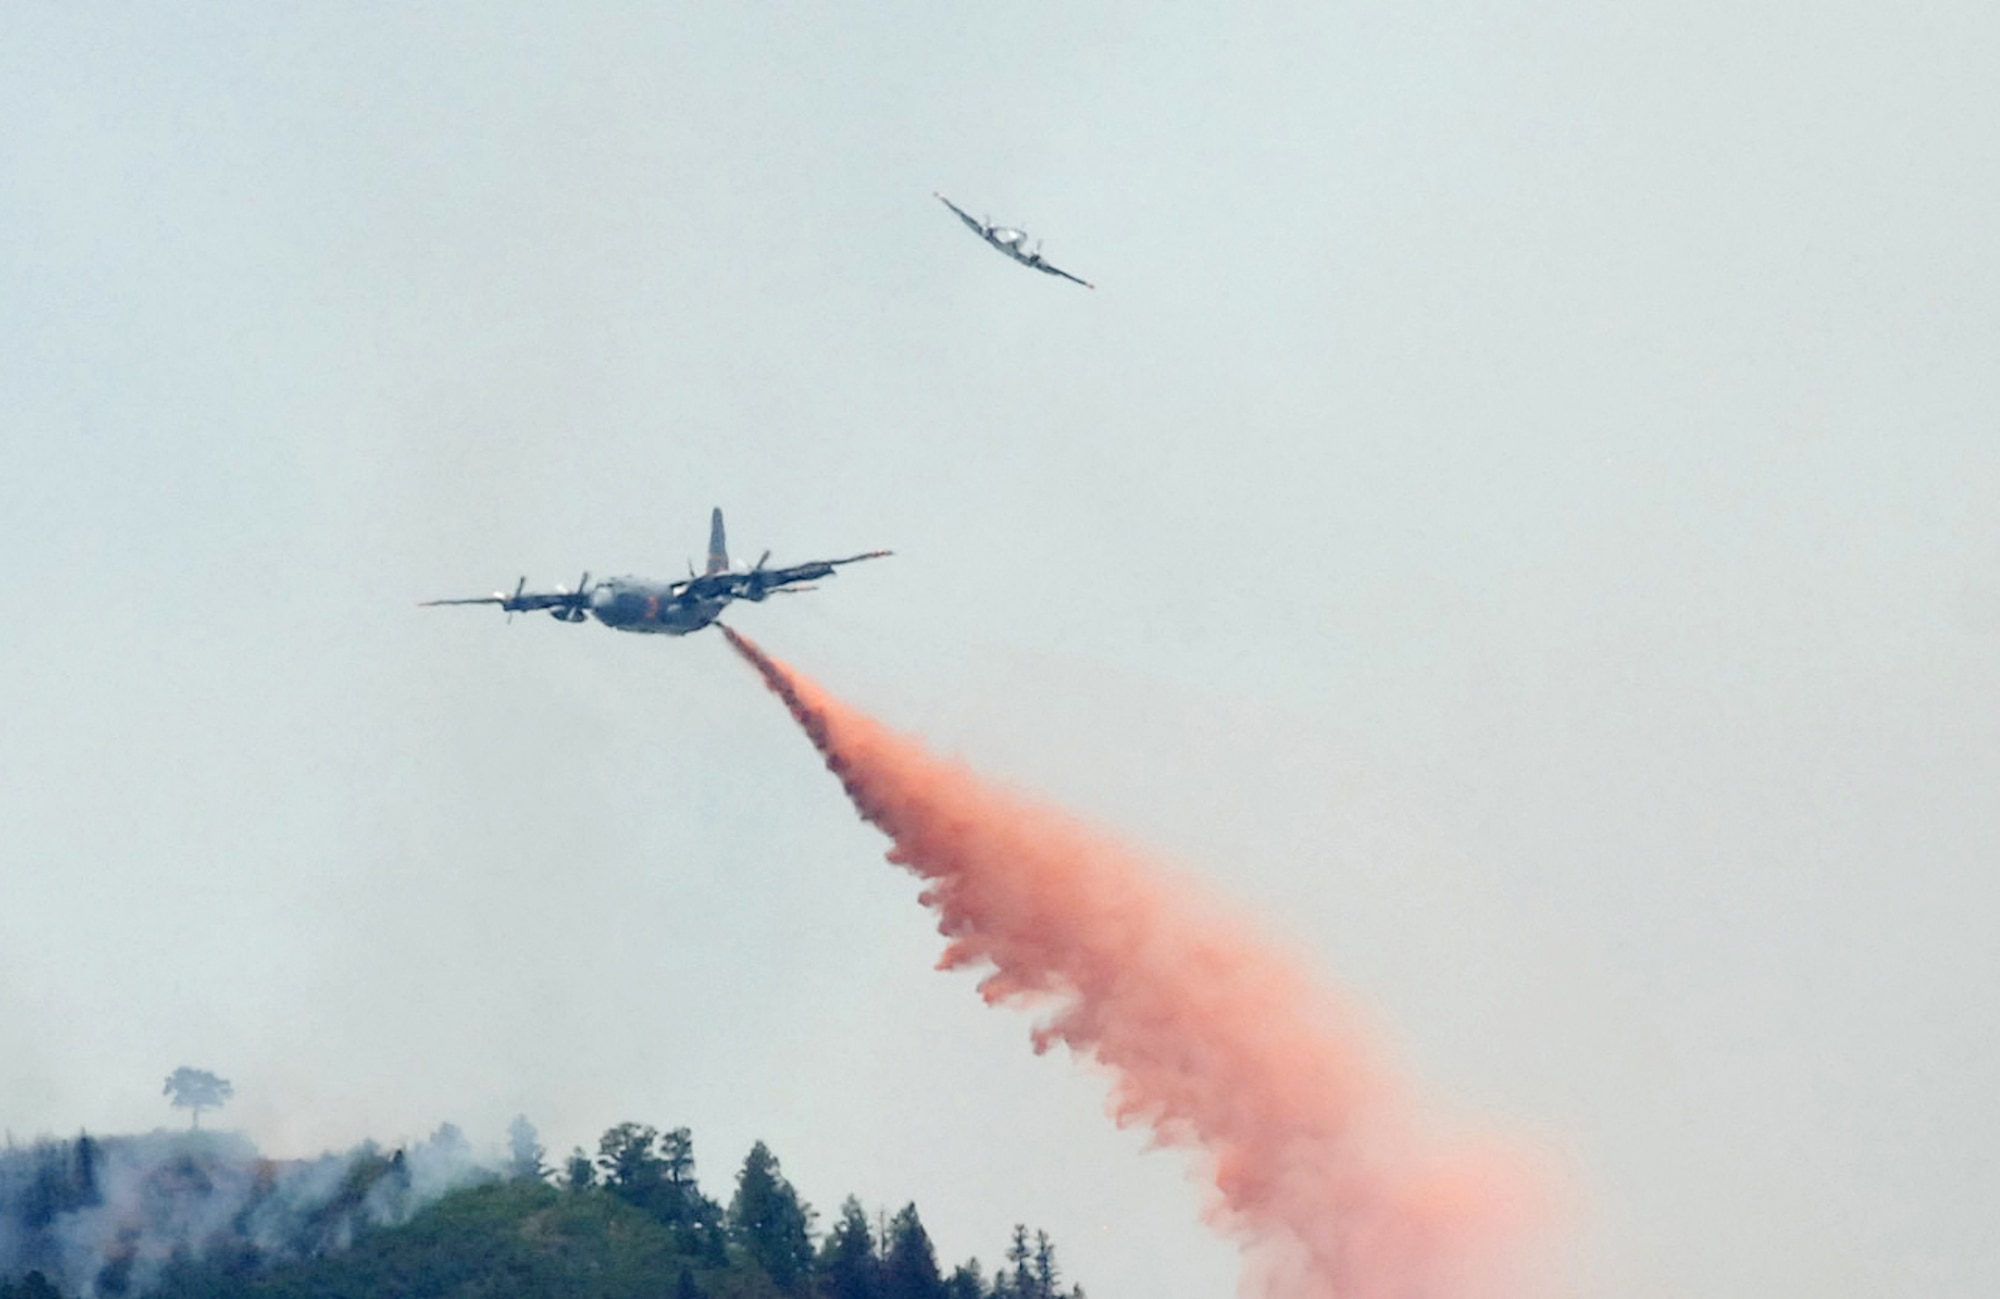 COLORADO SPRINGS, Colo. - A U.S. Forest Service lead plane C90 King Air breaks away as a Modular Airborne Firefighting System-equipped C-130 begins dropping retardant on a section of the Waldo Canyon fire near Colorado Springs, Colo. (U.S. Air Force photo by Tech. Sgt. Thomas J. Doscher)